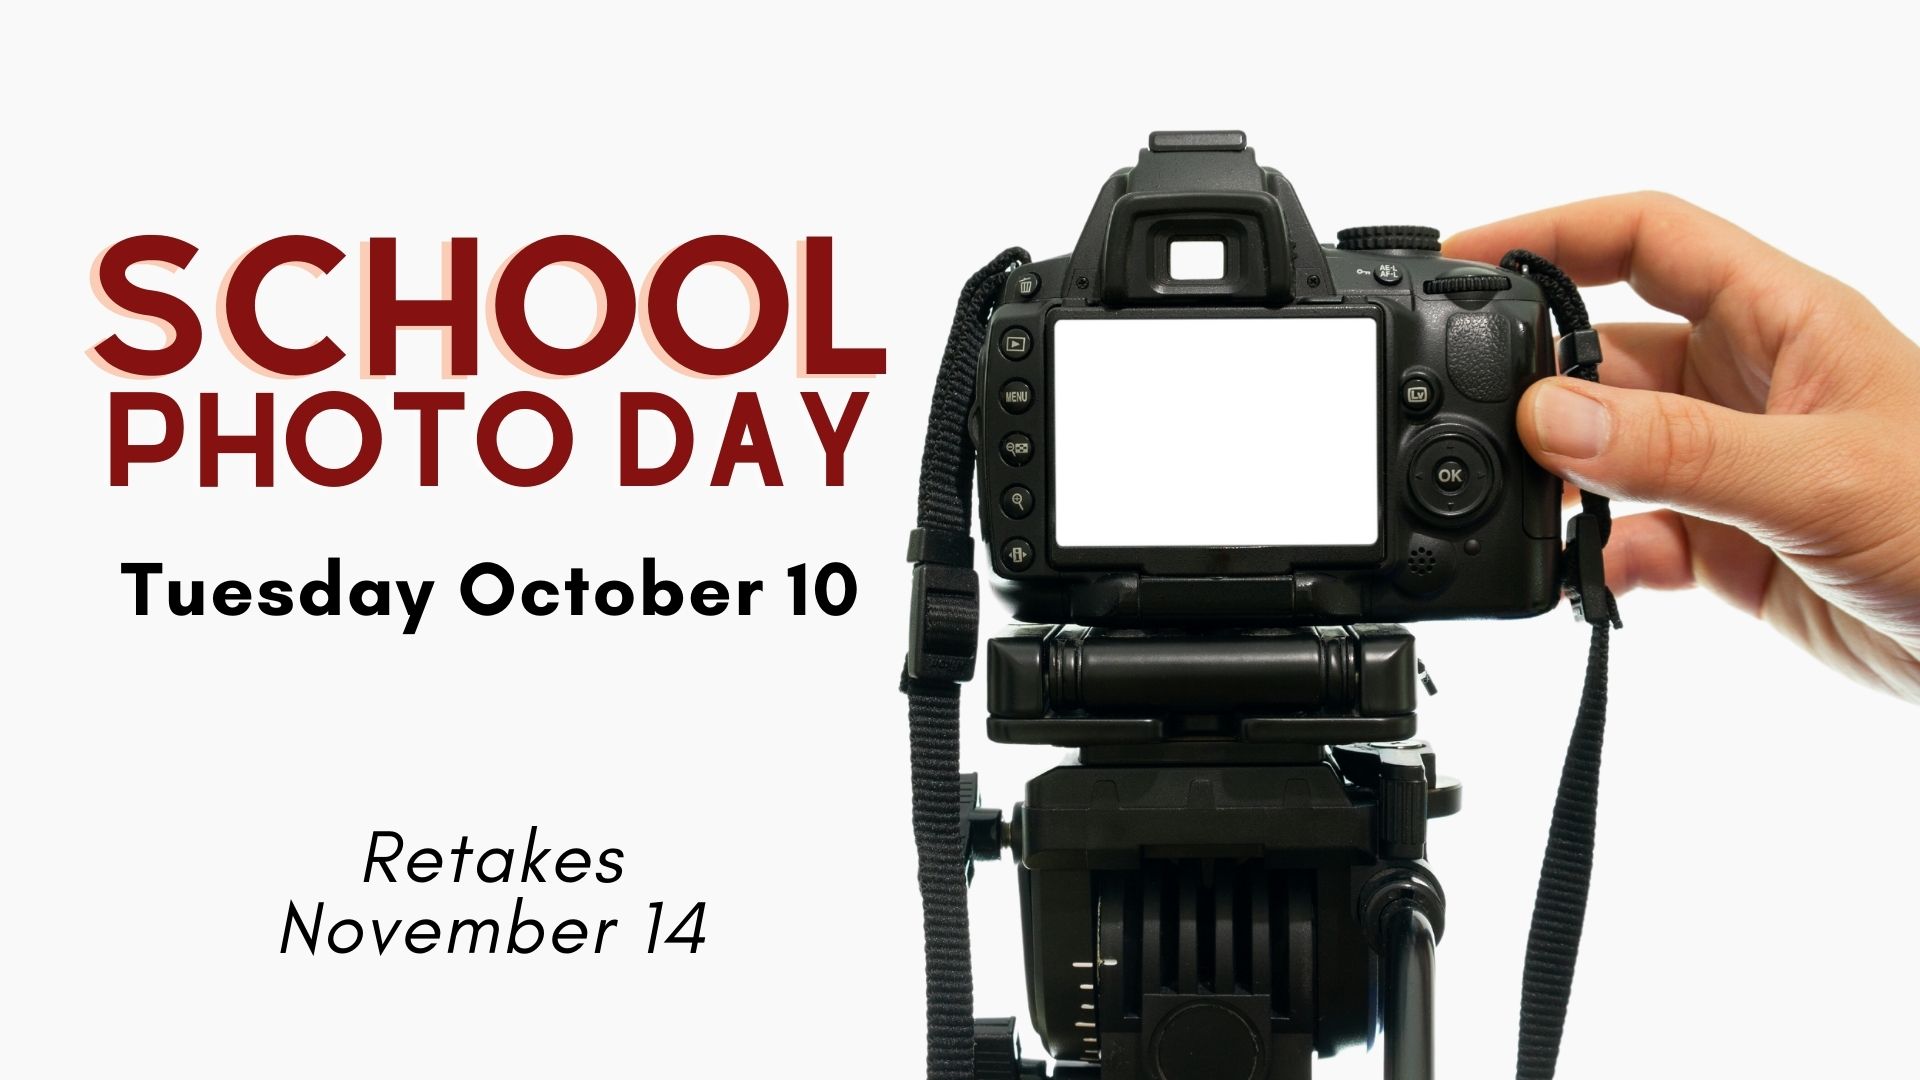 School Photo Day is coming up!